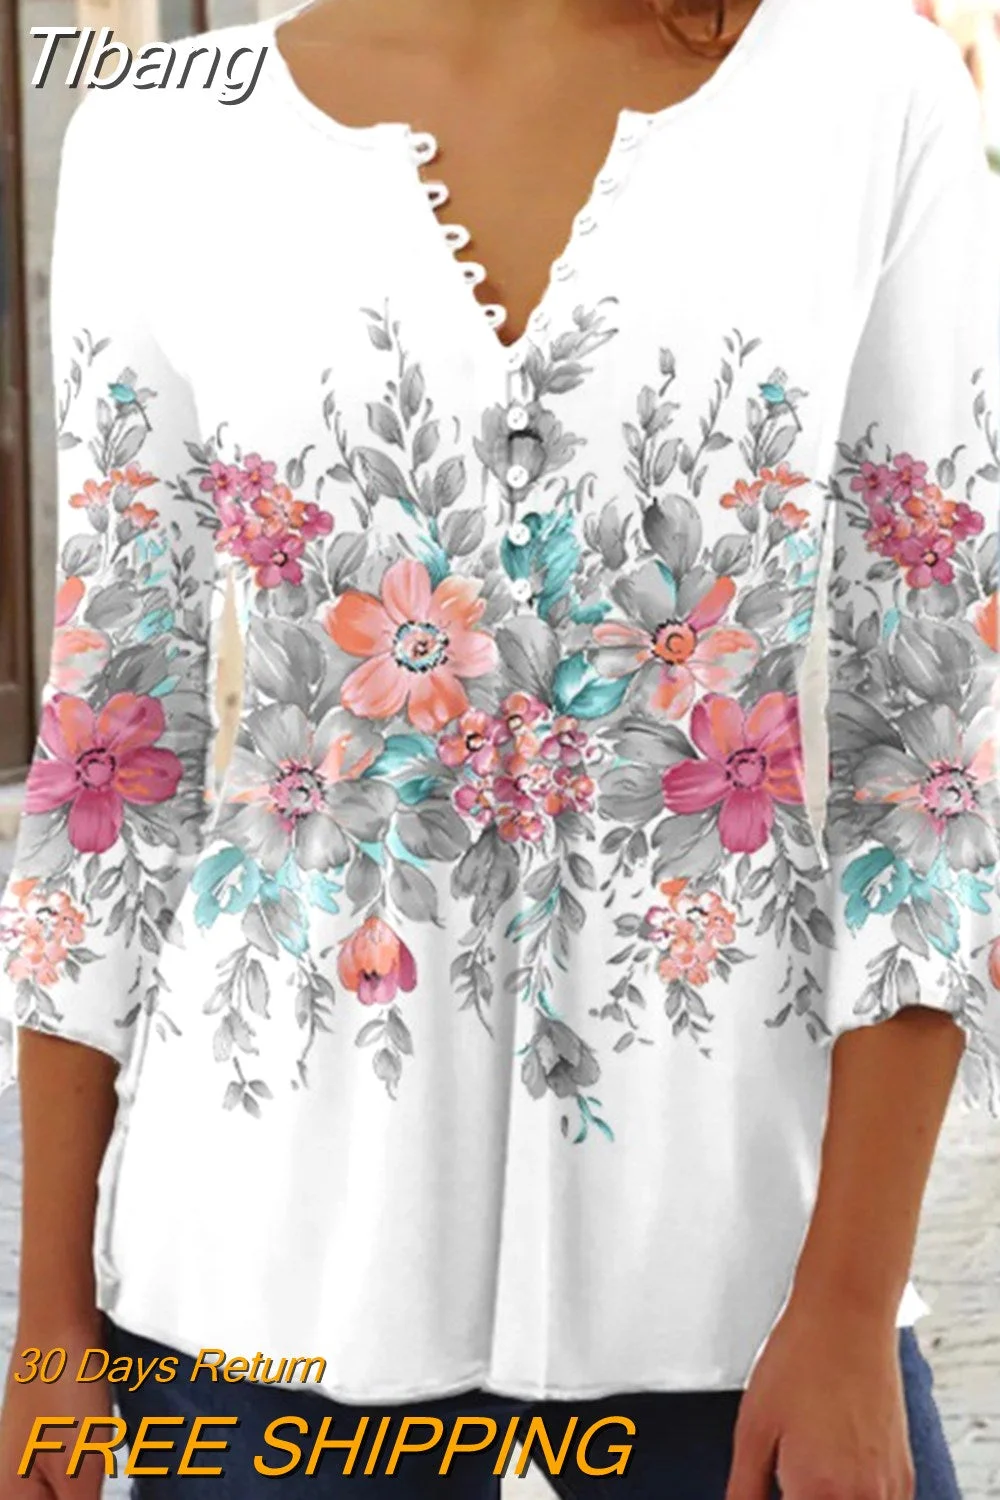 Tlbang Floral Print Summer Blouse Women Elegant Simple Shirt V Neck Button 3/4 Length Sleeve Casual Holiday Basic Tops 27573